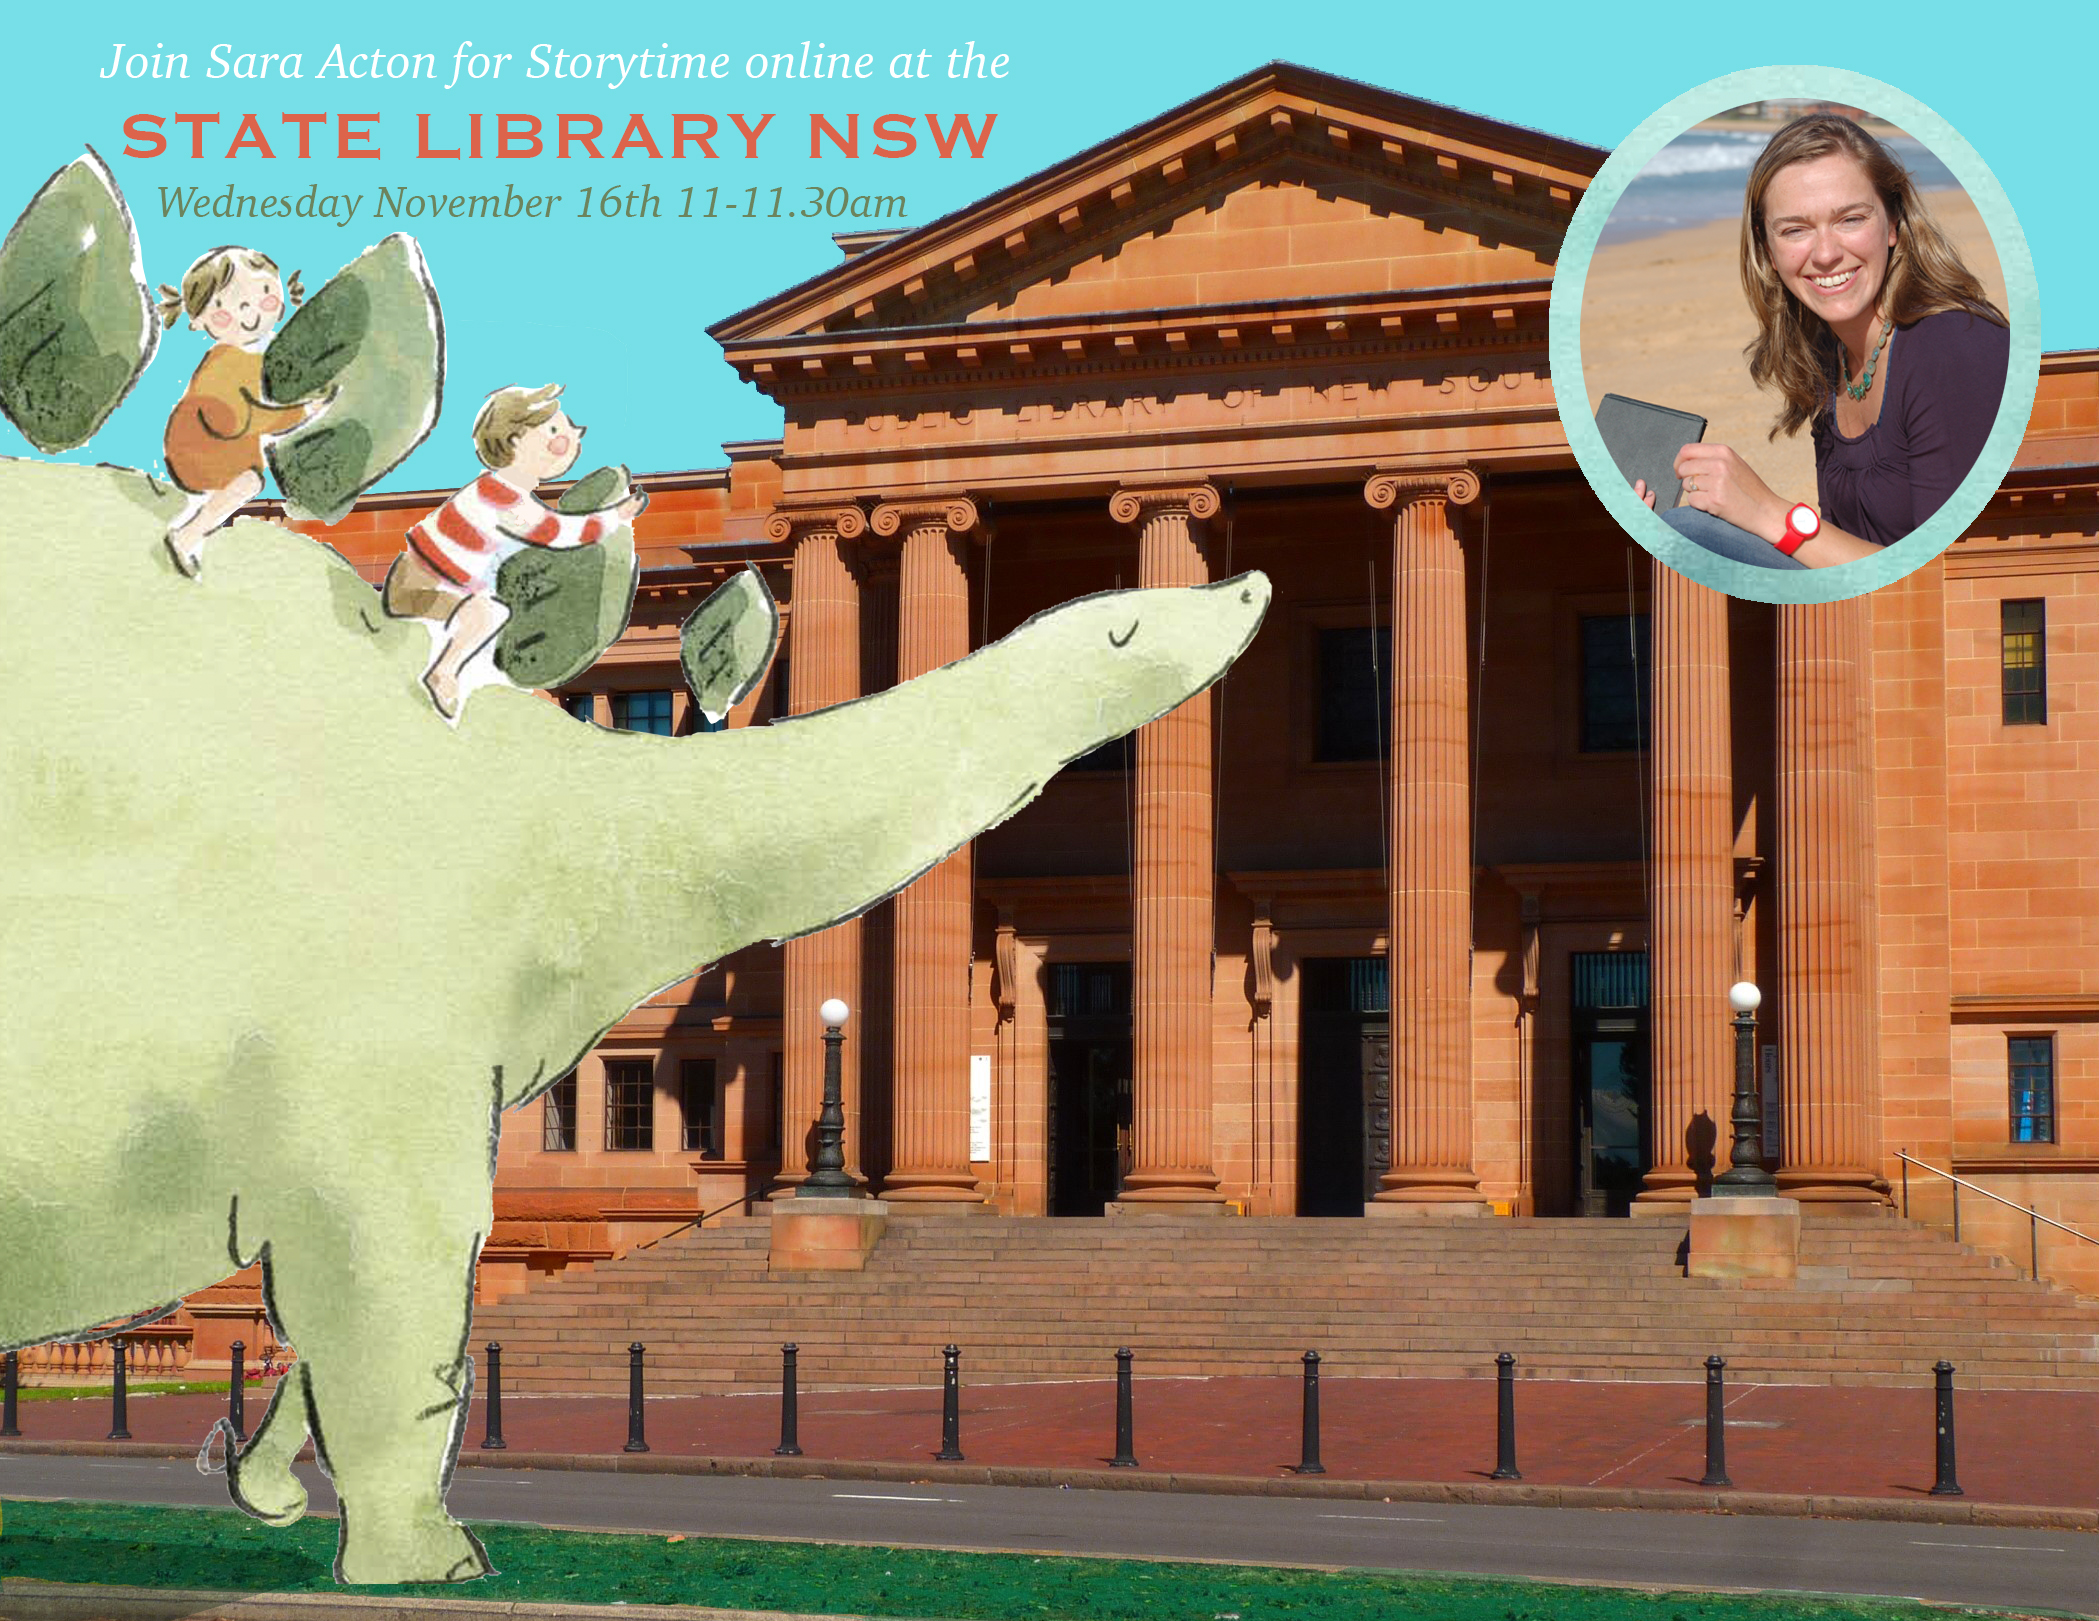 Illustrated dinosaur in front of the State Library building